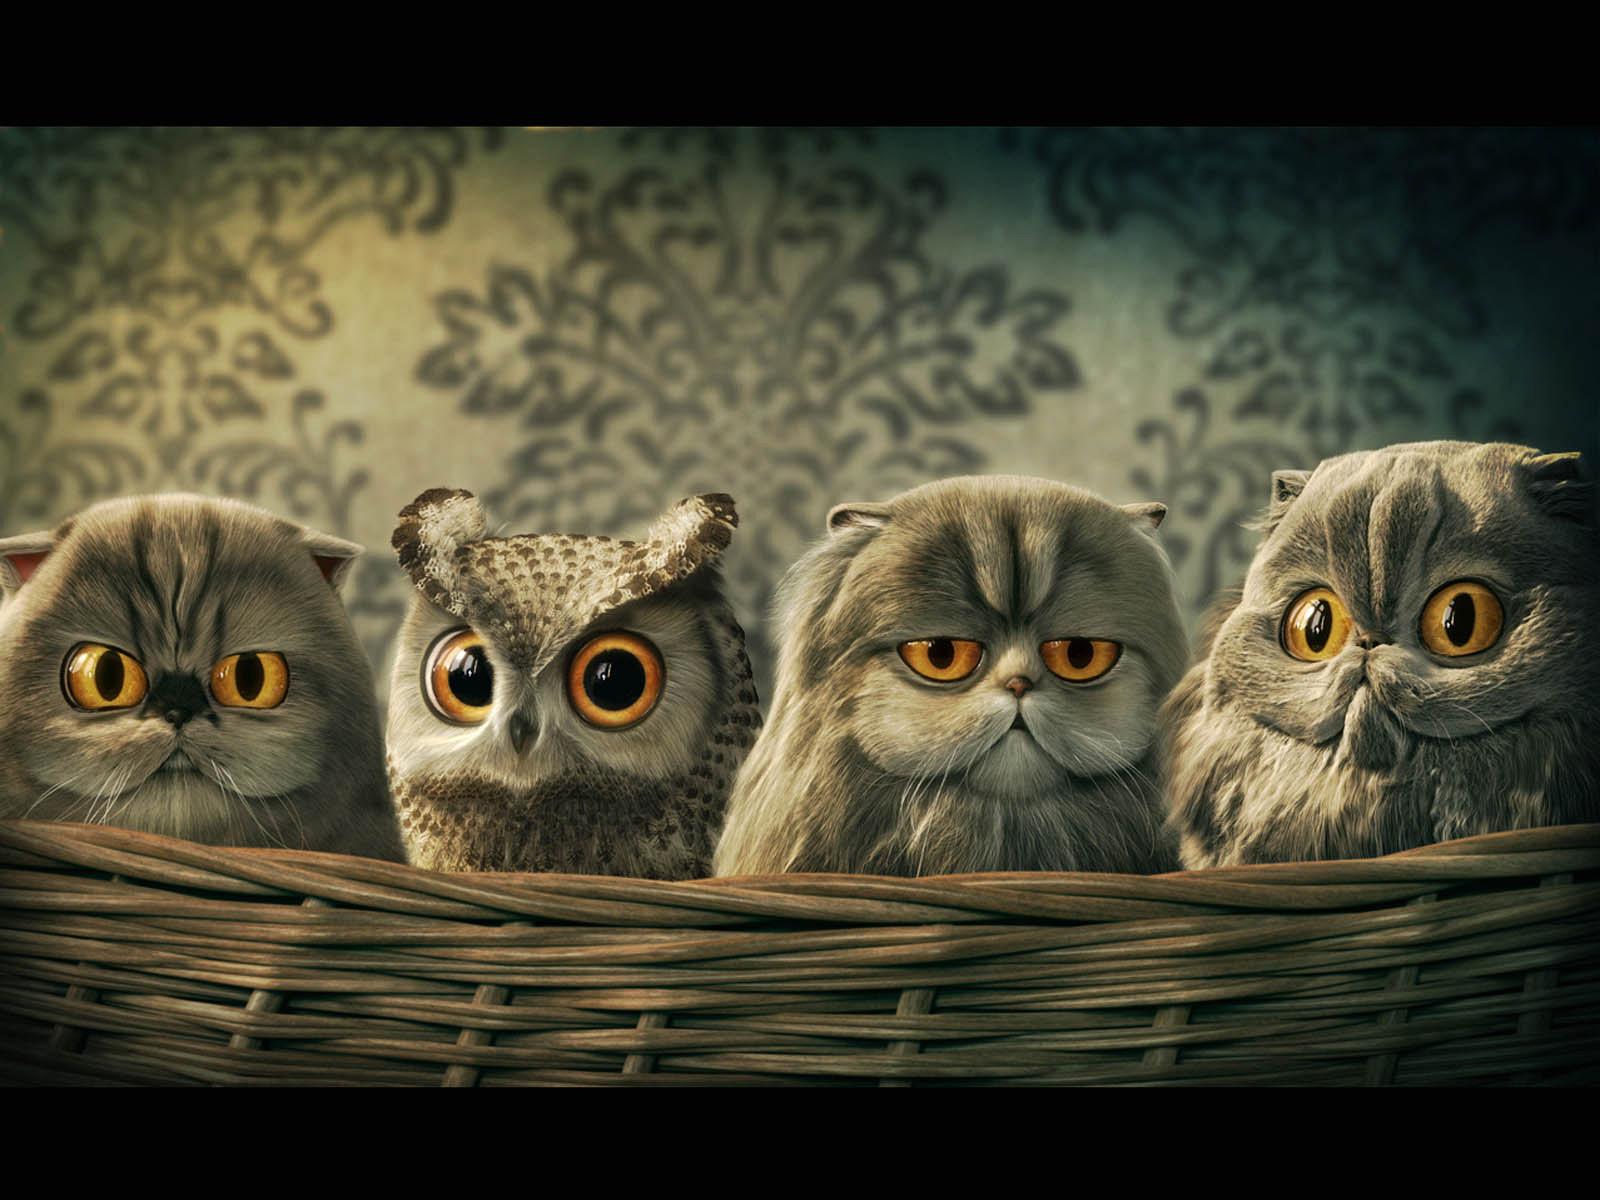 Wallpaper Funny Cats Or Owls x 1200 Funny Weird